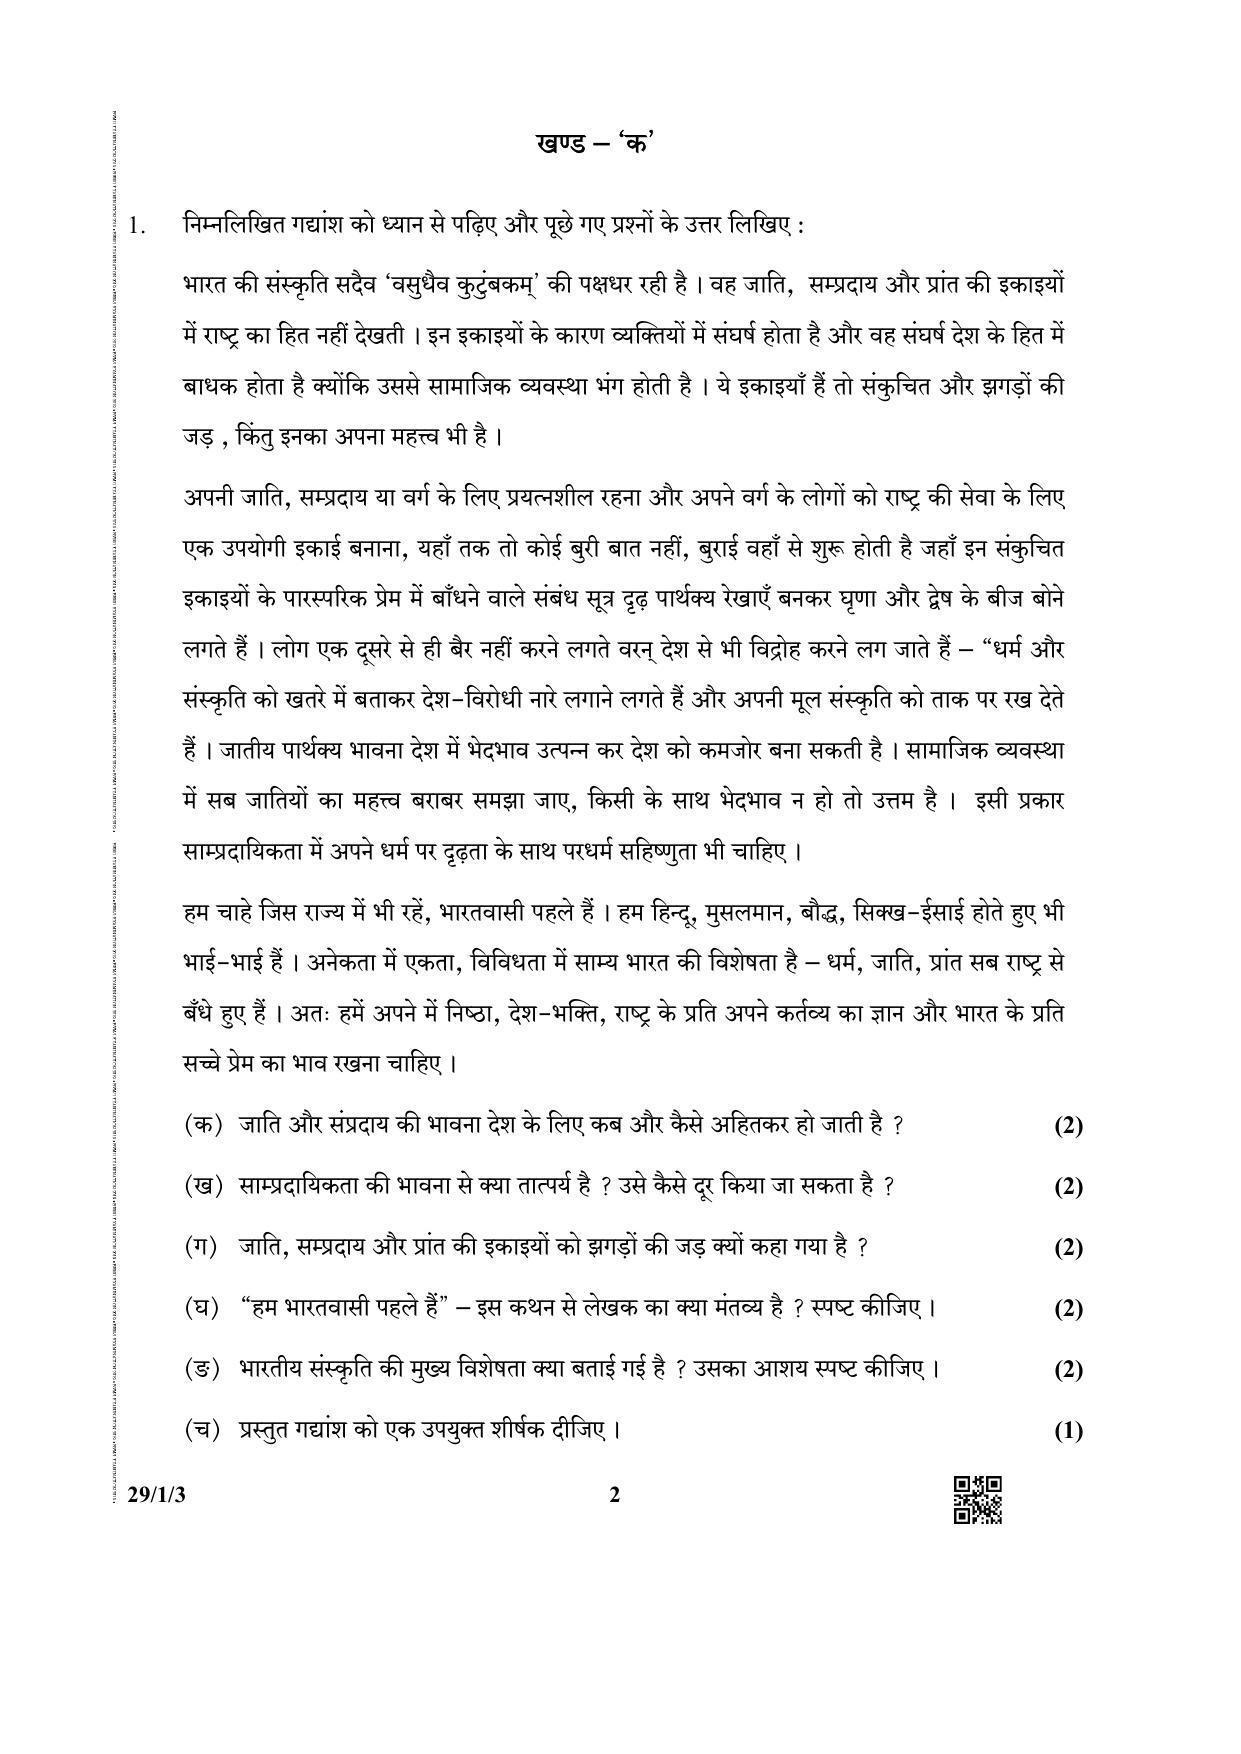 CBSE Class 12 29-1-3 (Hindi ELECTIVE) 2019 Question Paper - Page 2